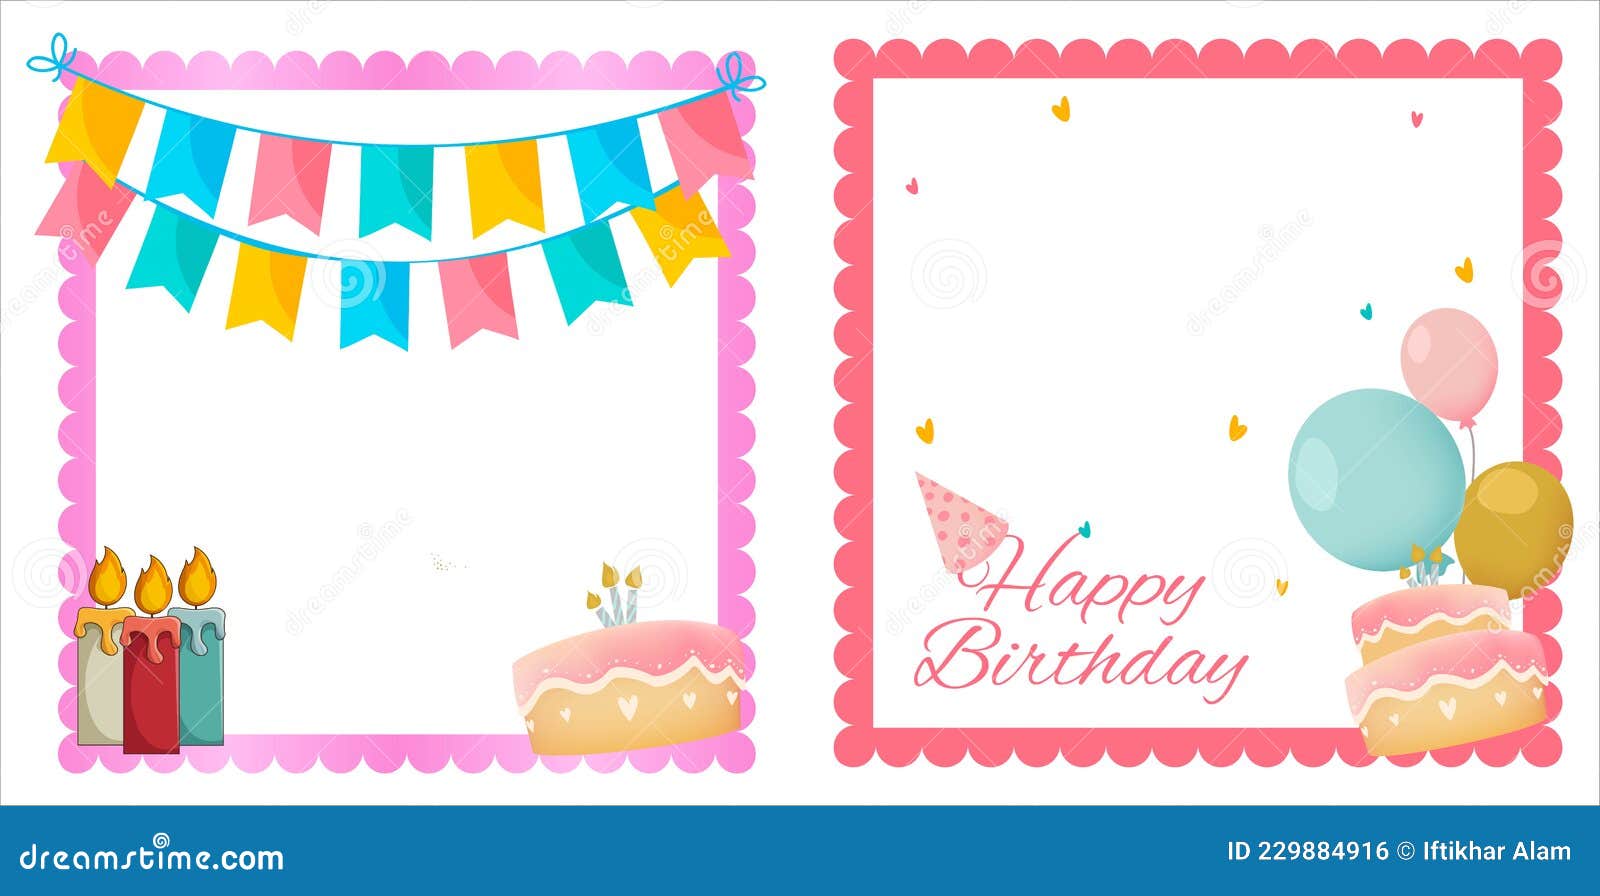 Birthday Wish Frame Design with Cakes and Party Banner. Happy ...